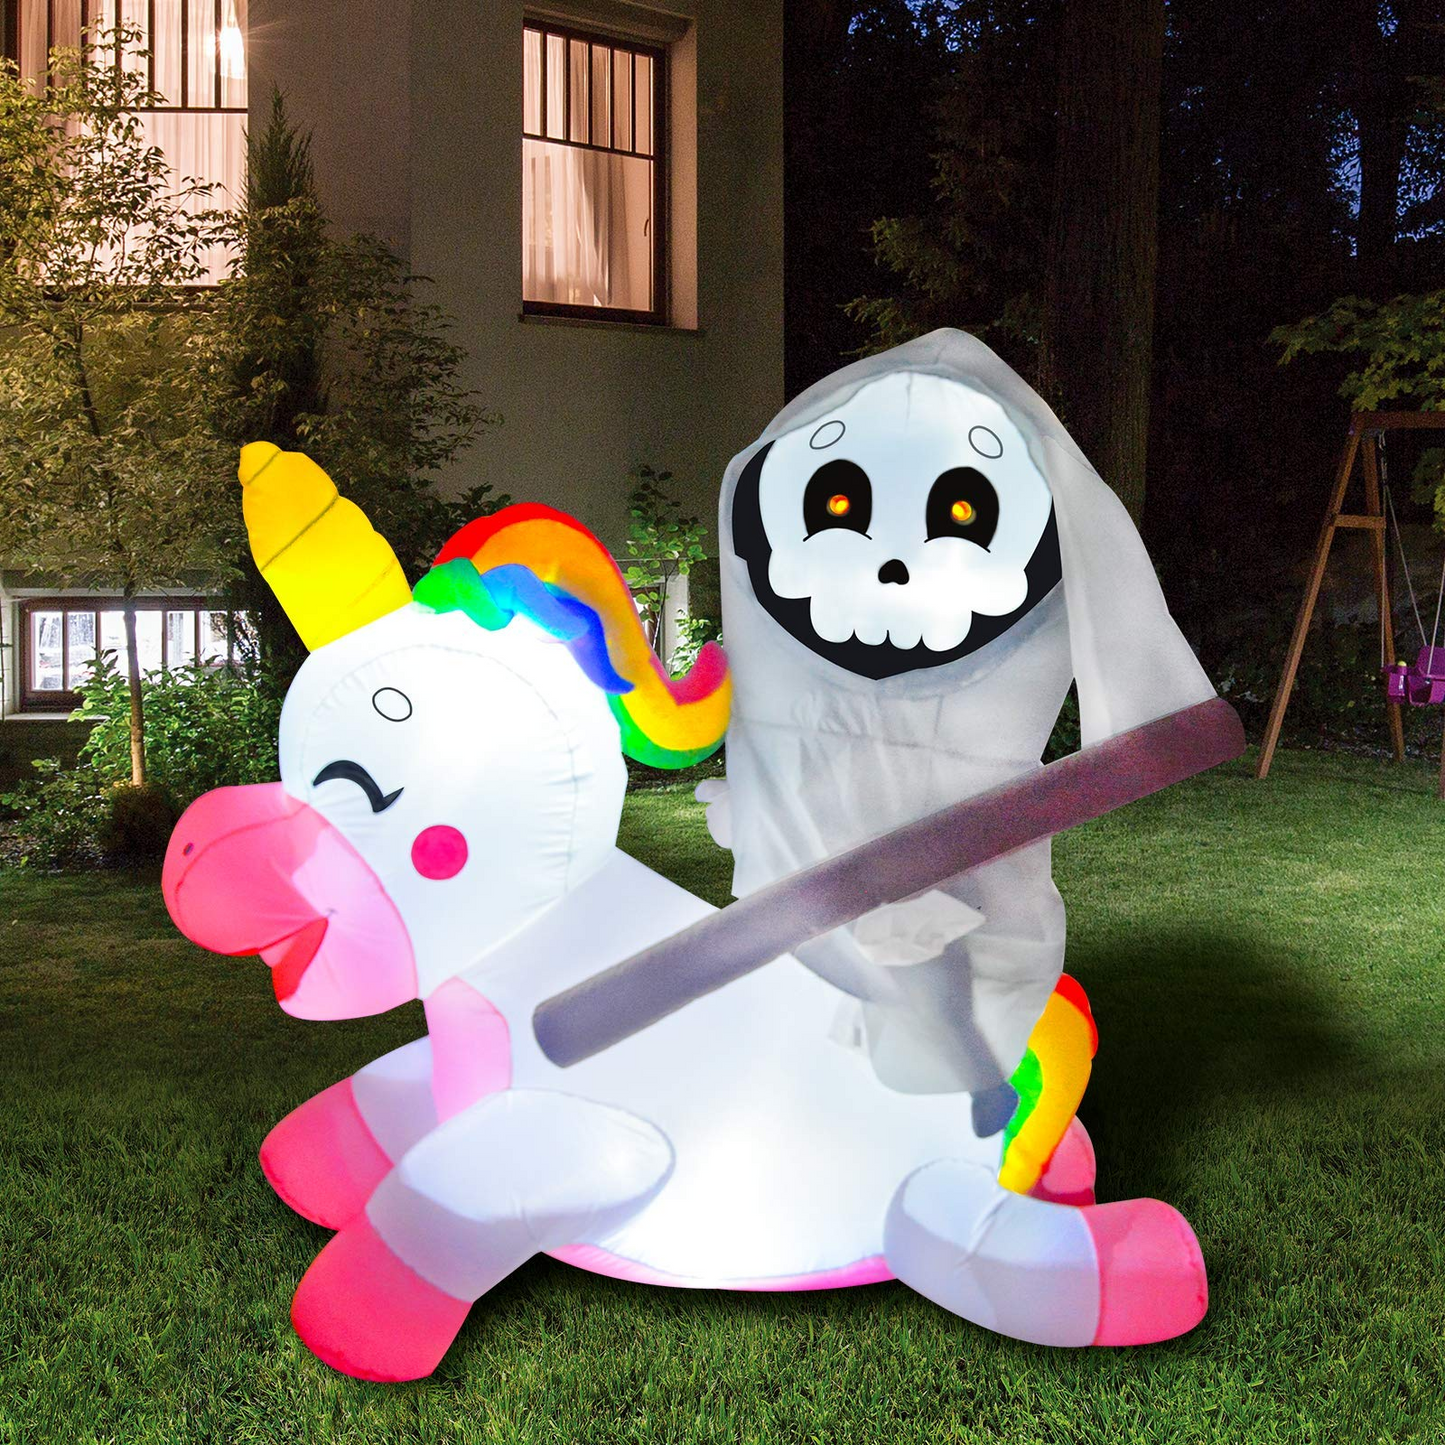 Halloween Tall Reaper Ride on inflatable ride a unicorn costume (5 ft)